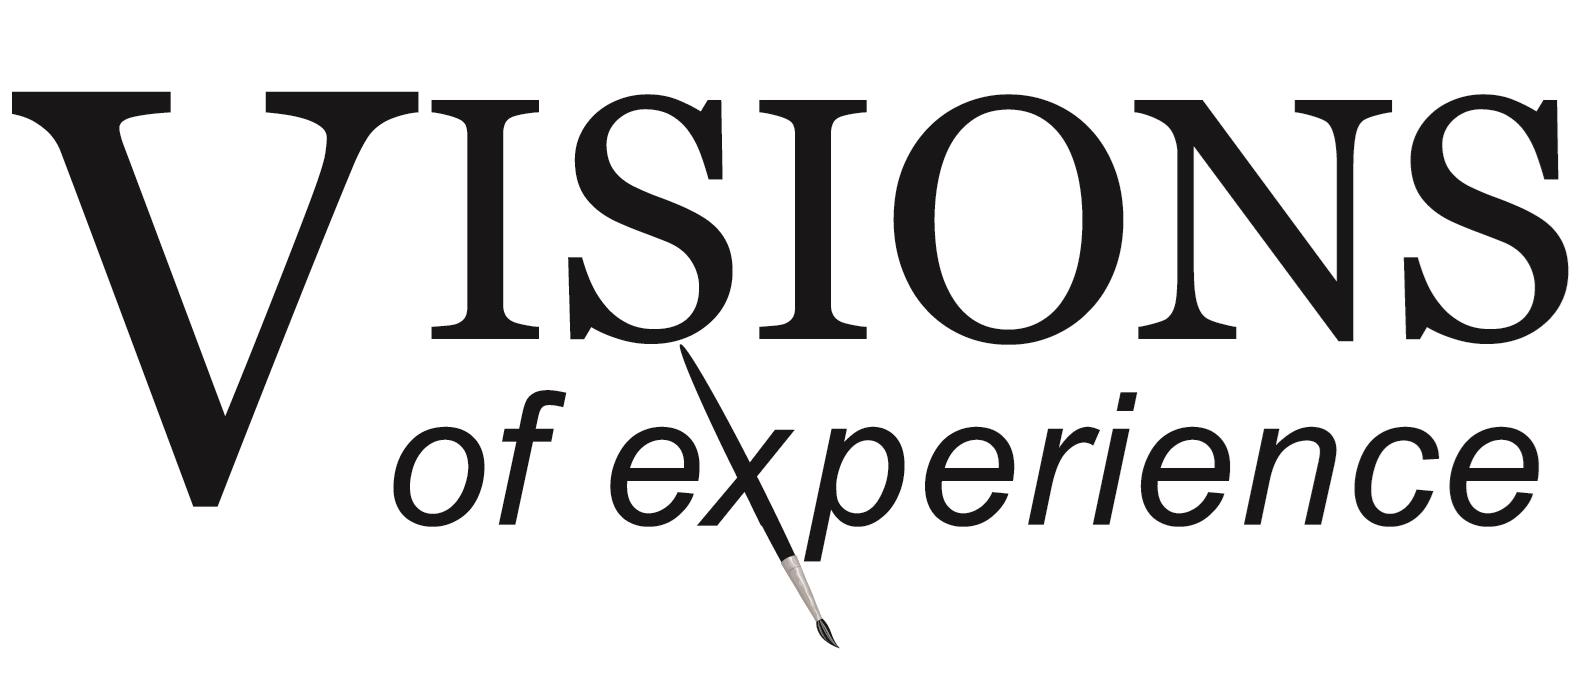 visions of experience logo